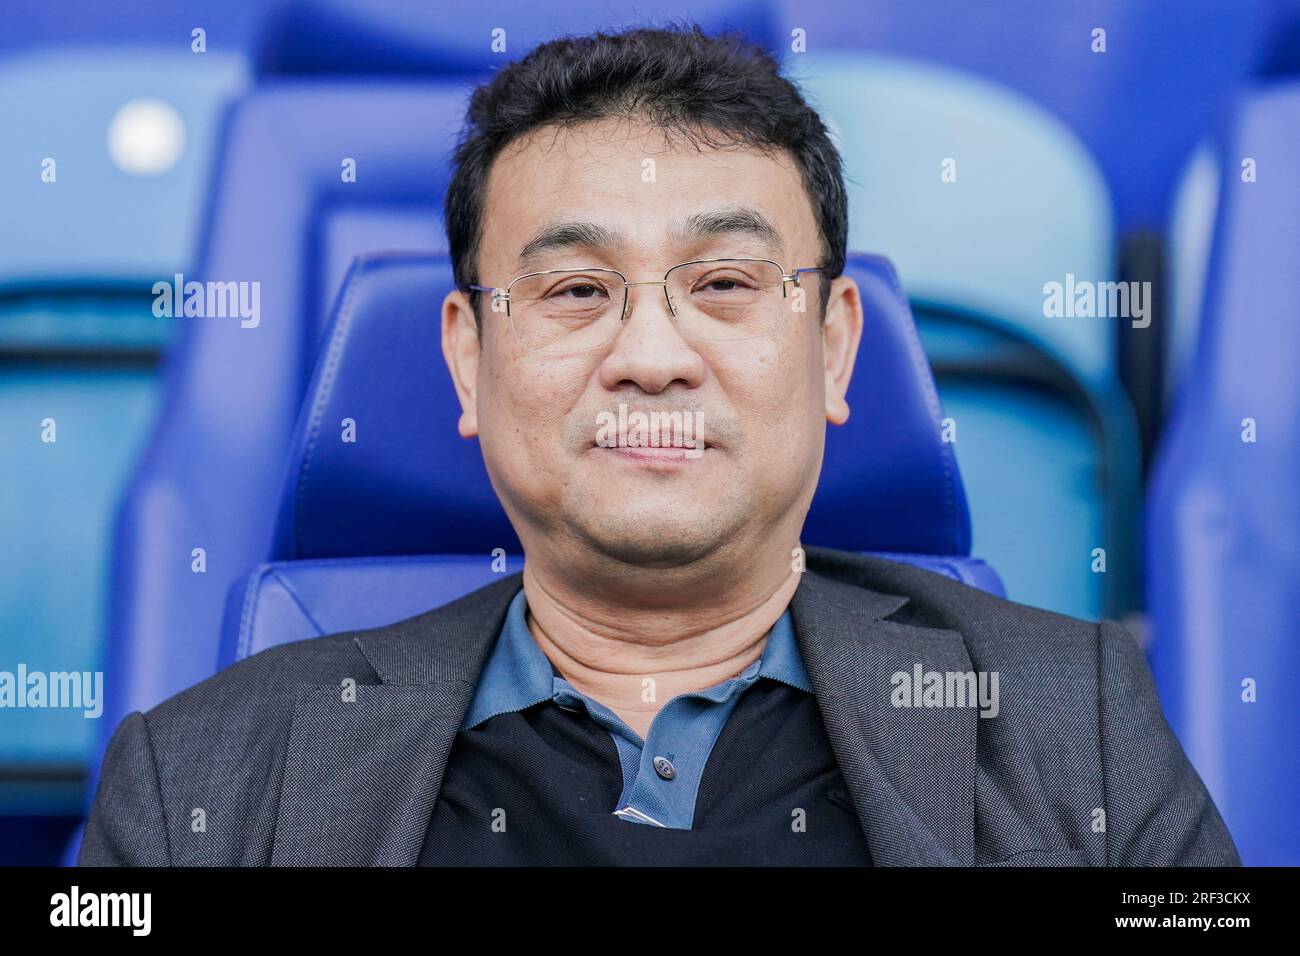 Sheffield, UK. 29th July, 2023. Sheffield Wednesday Owner Dejphon Chansiri during the Sheffield Wednesday FC vs Luton Town FC at Hillsborough Stadium, Sheffield, United Kingdom on 29 July 2023 Credit: Every Second Media/Alamy Live News Stock Photo